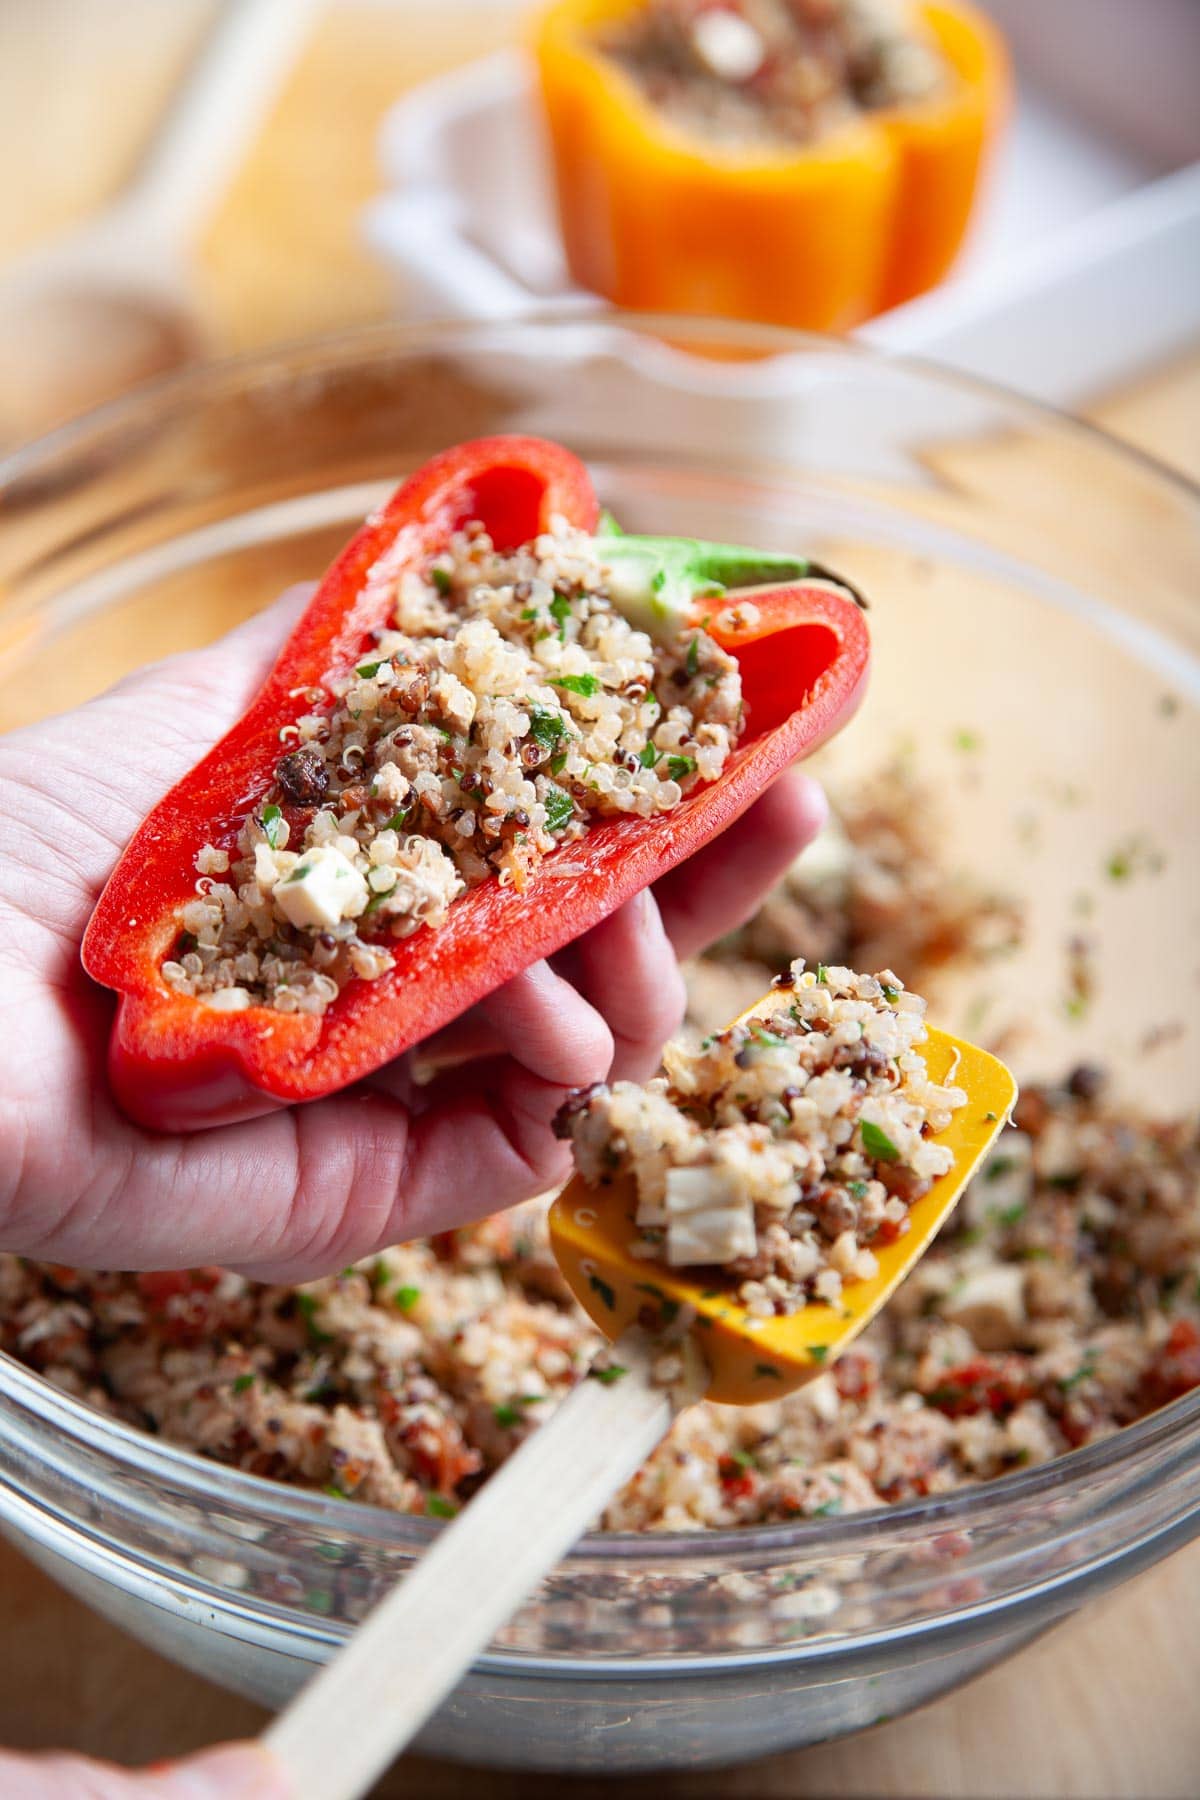 Red bell peppers stuffed with ground meat and cheese. 